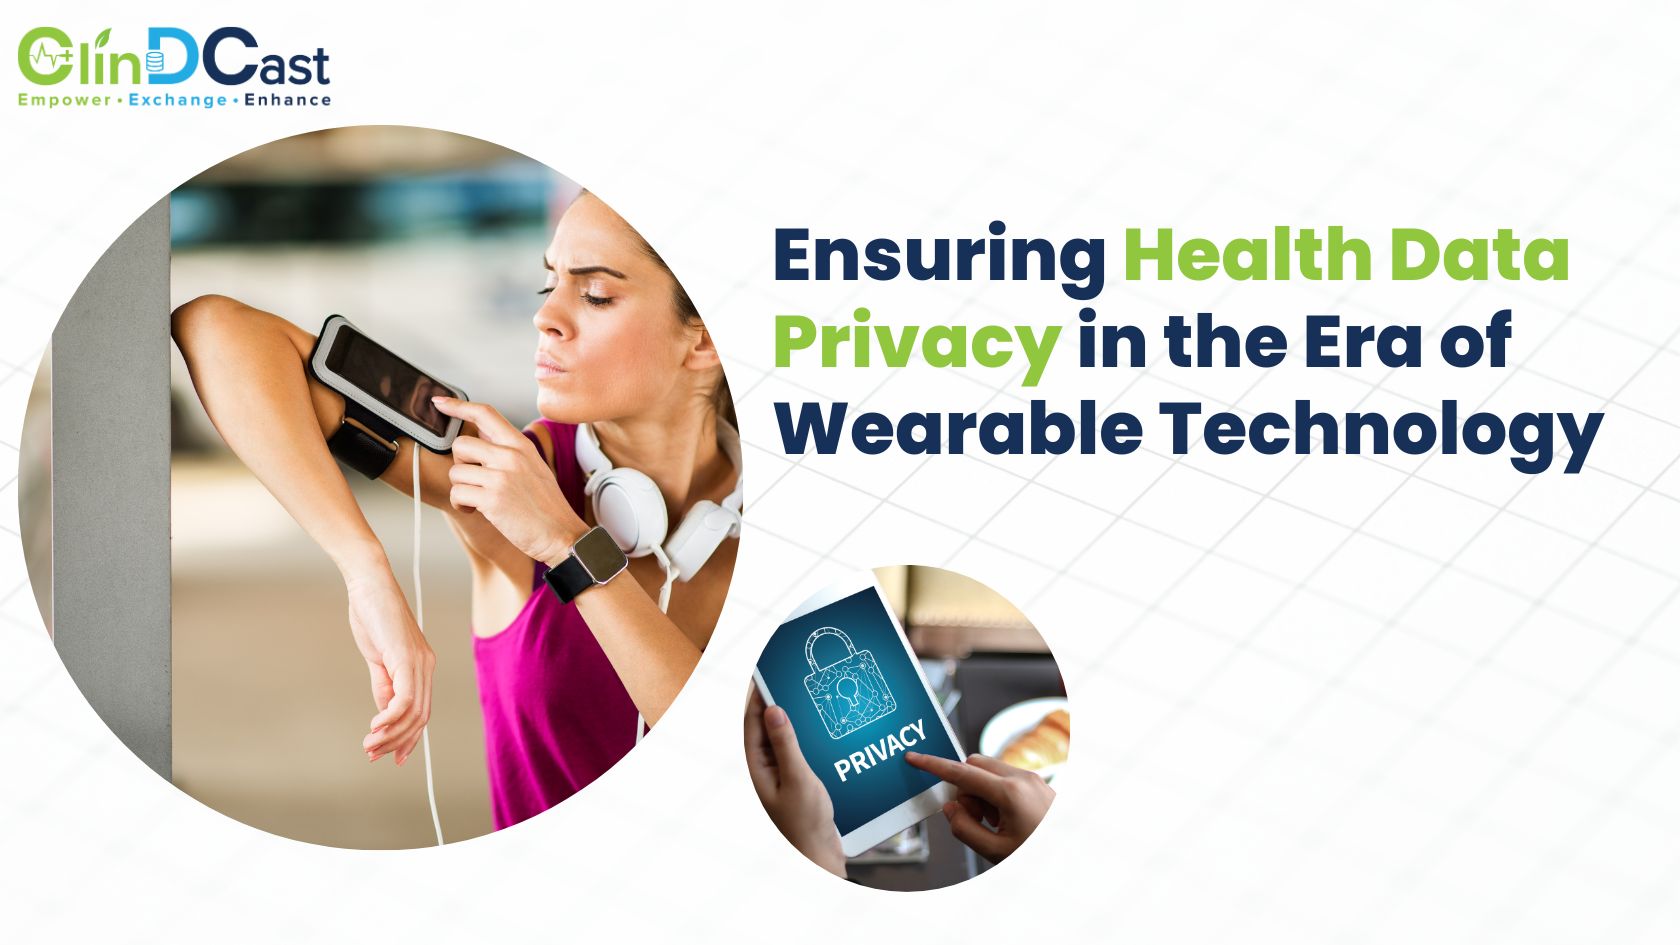 Ensuring Health Data Privacy in the Era of Wearable Technology